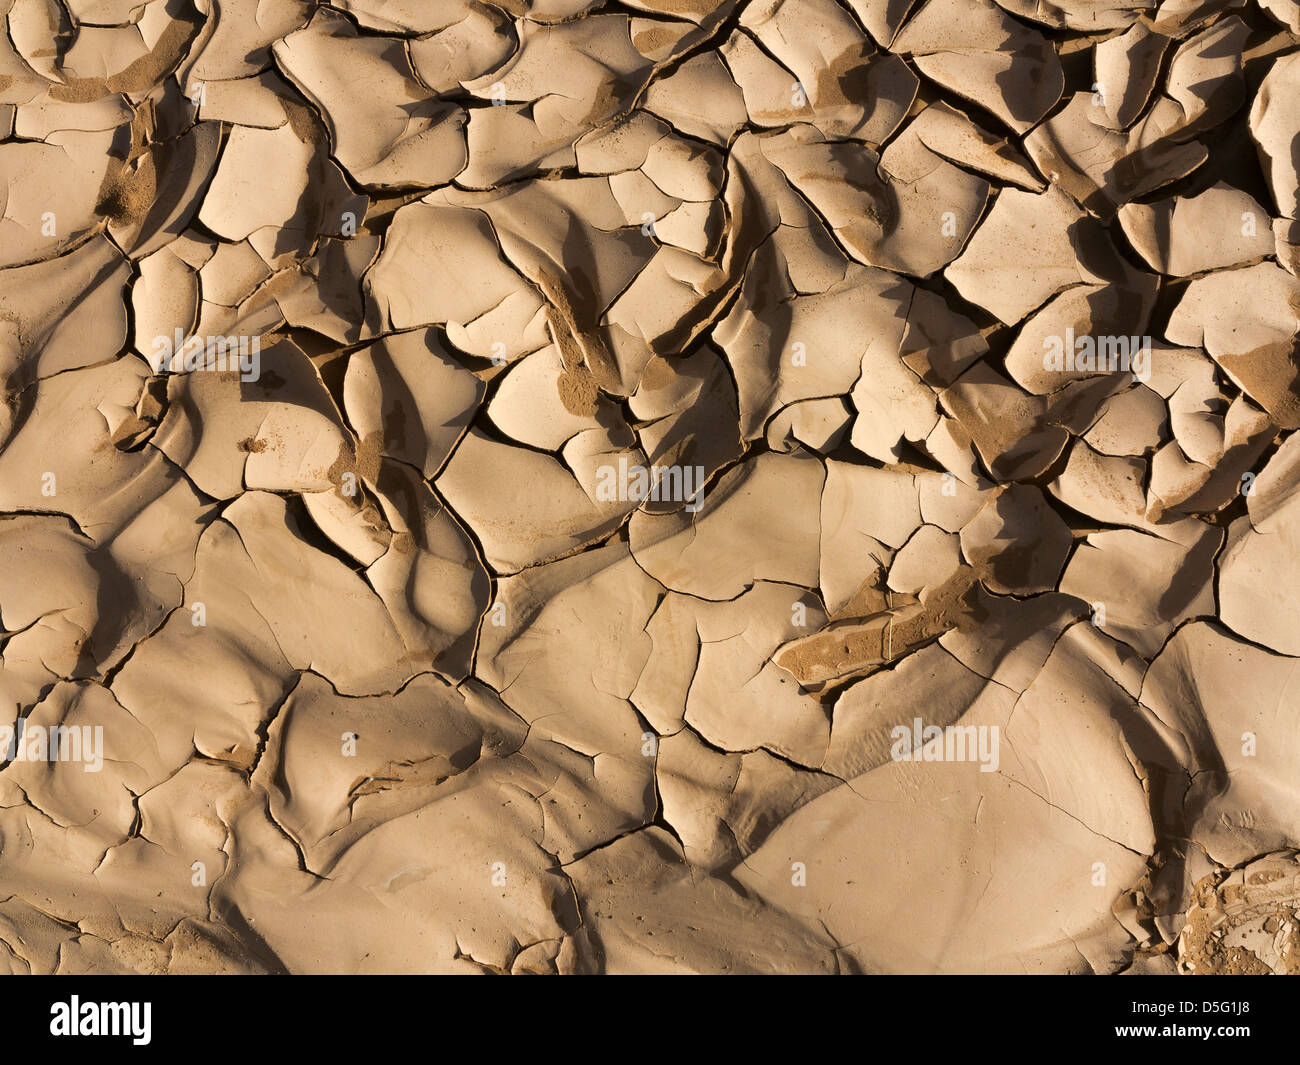 Close up of reticulated dried mud on desert floor creating abstract patterns Stock Photo